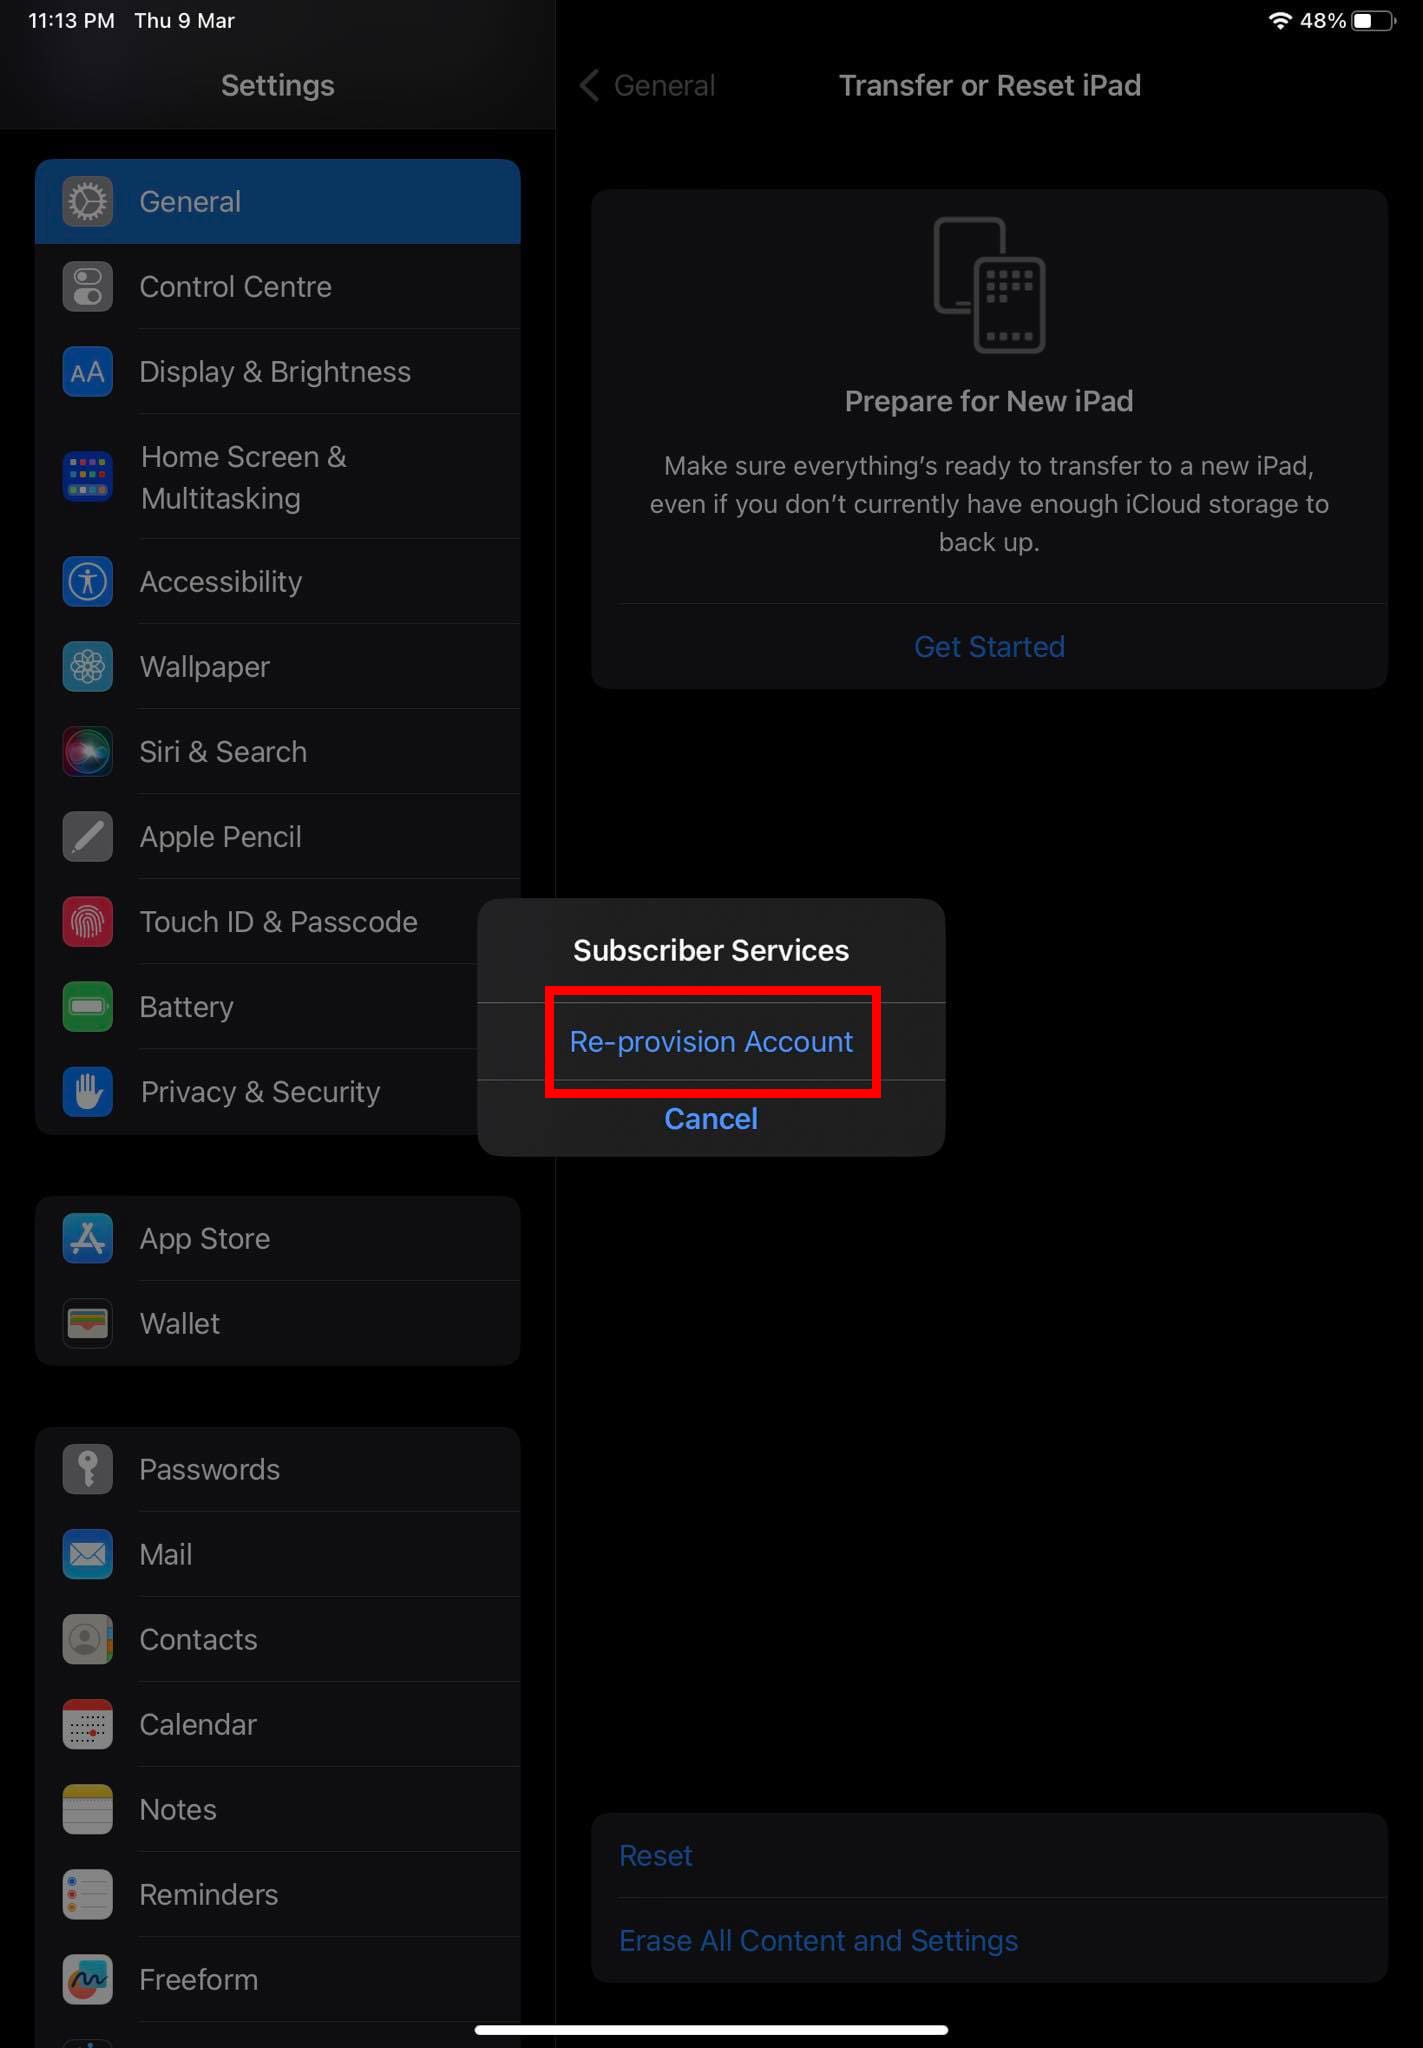 Perform a subscriber services reset on iPad